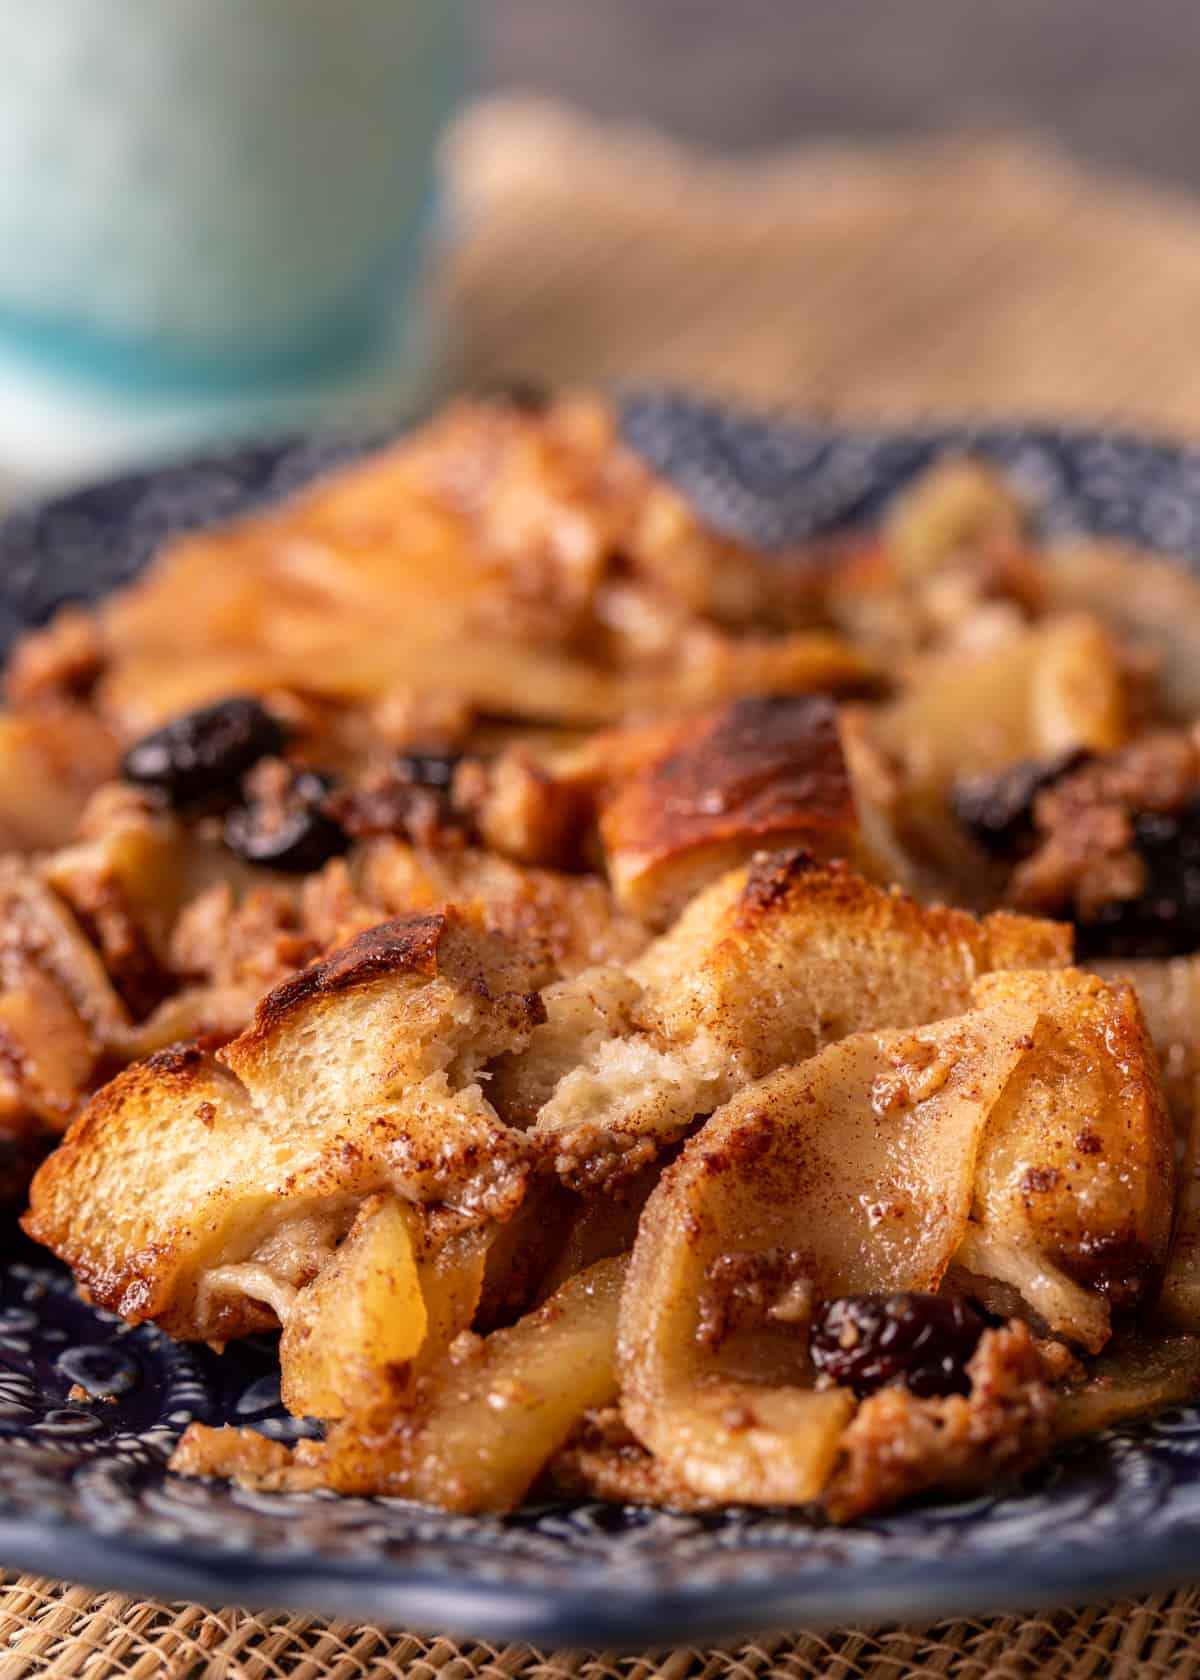 side view closeup: French toast casserole recipe with apples and raisins showing